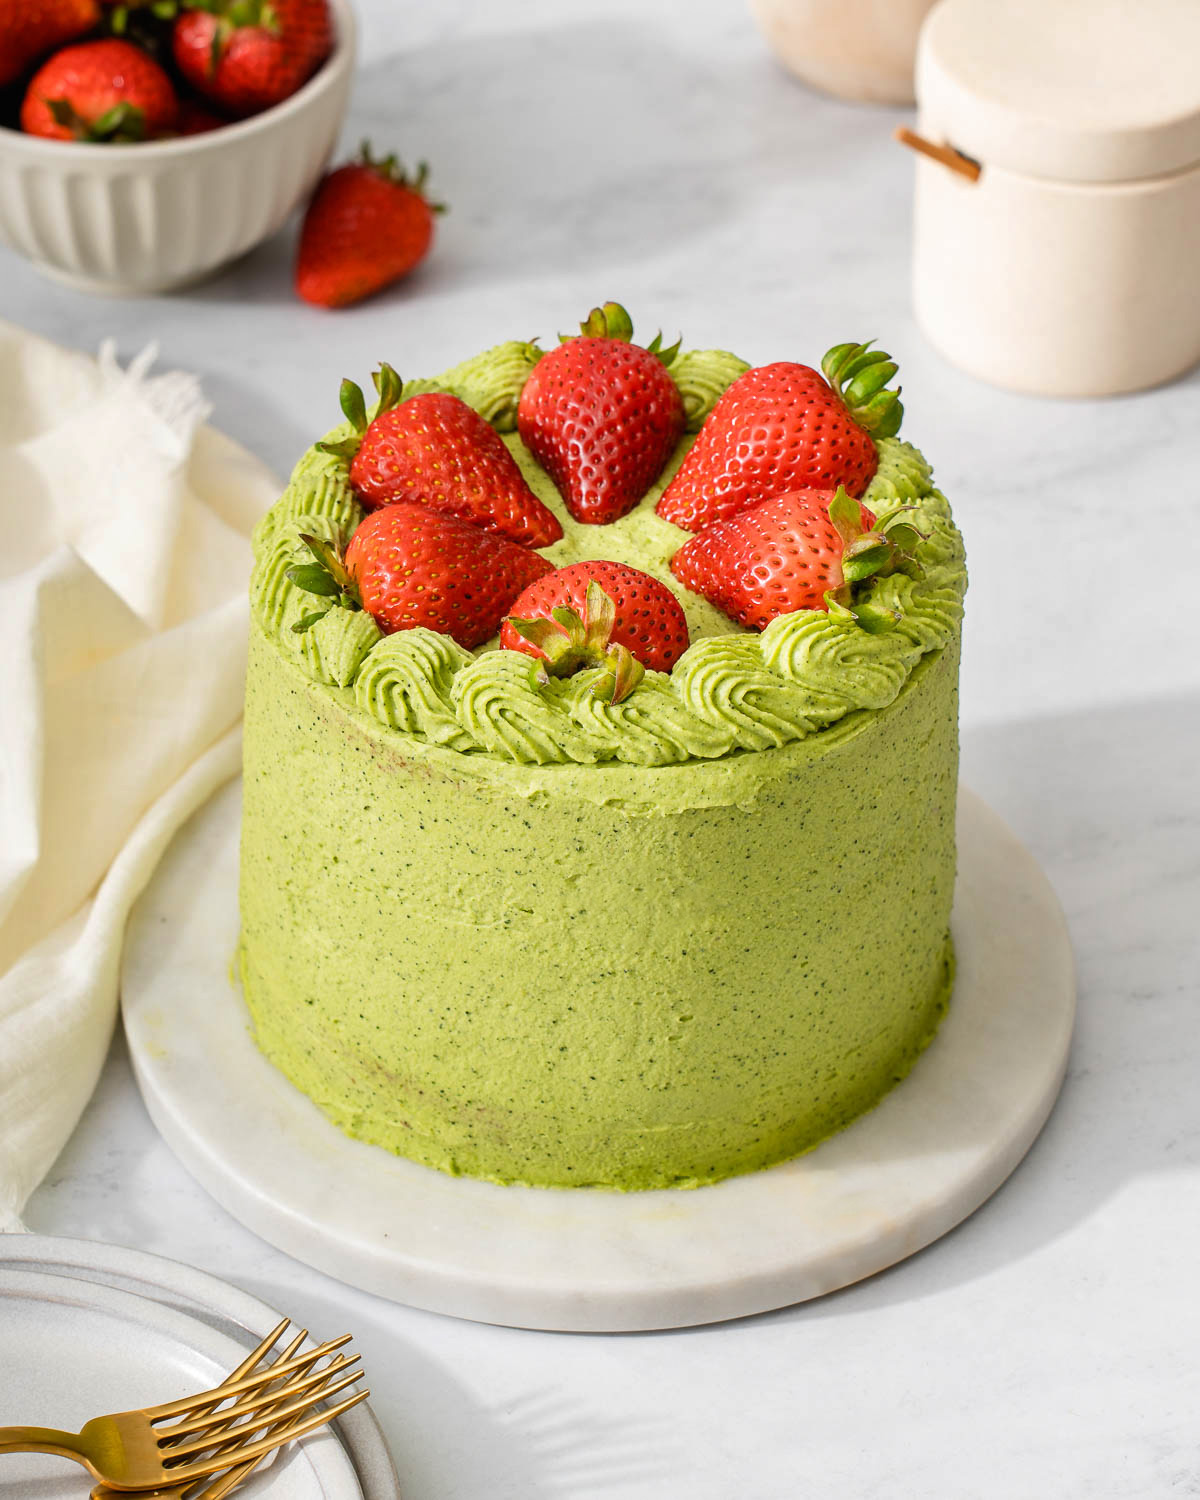 A matcha cake with strawberries served on a marble tray.